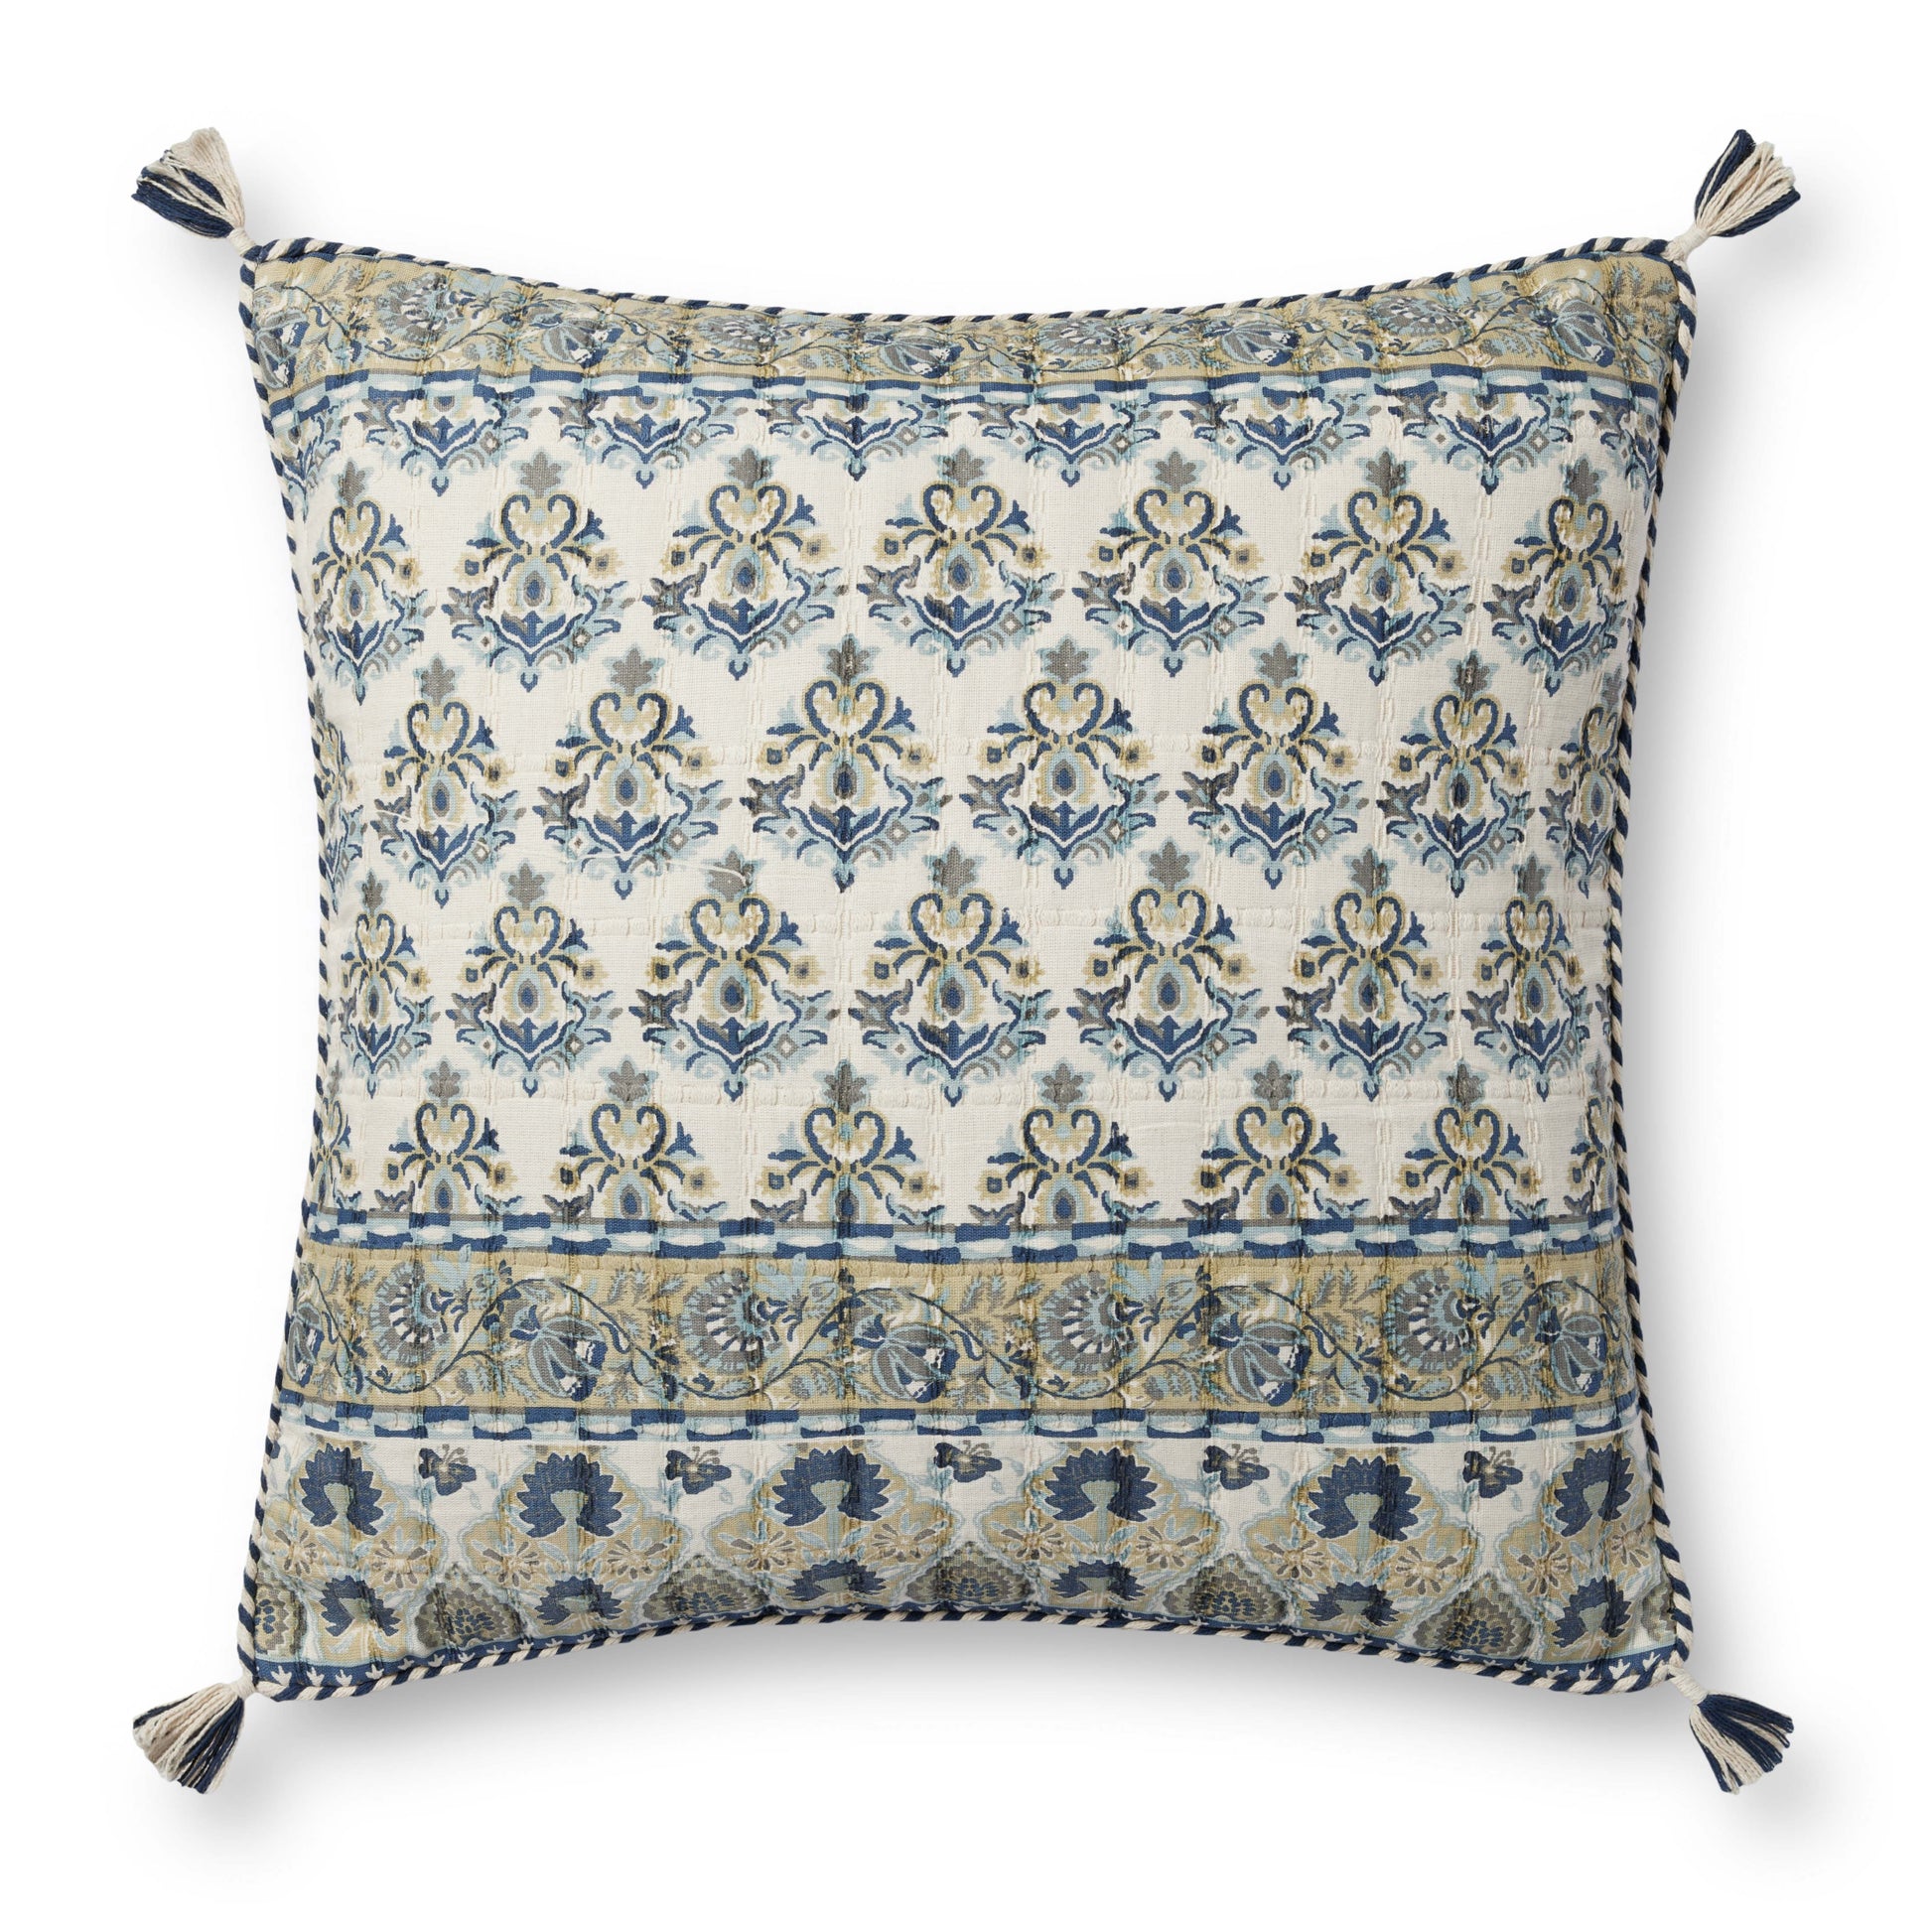 Photo of a pillow;  PLL0114 Blue / Multi 22'' x 22'' Cover w/Poly Pillow